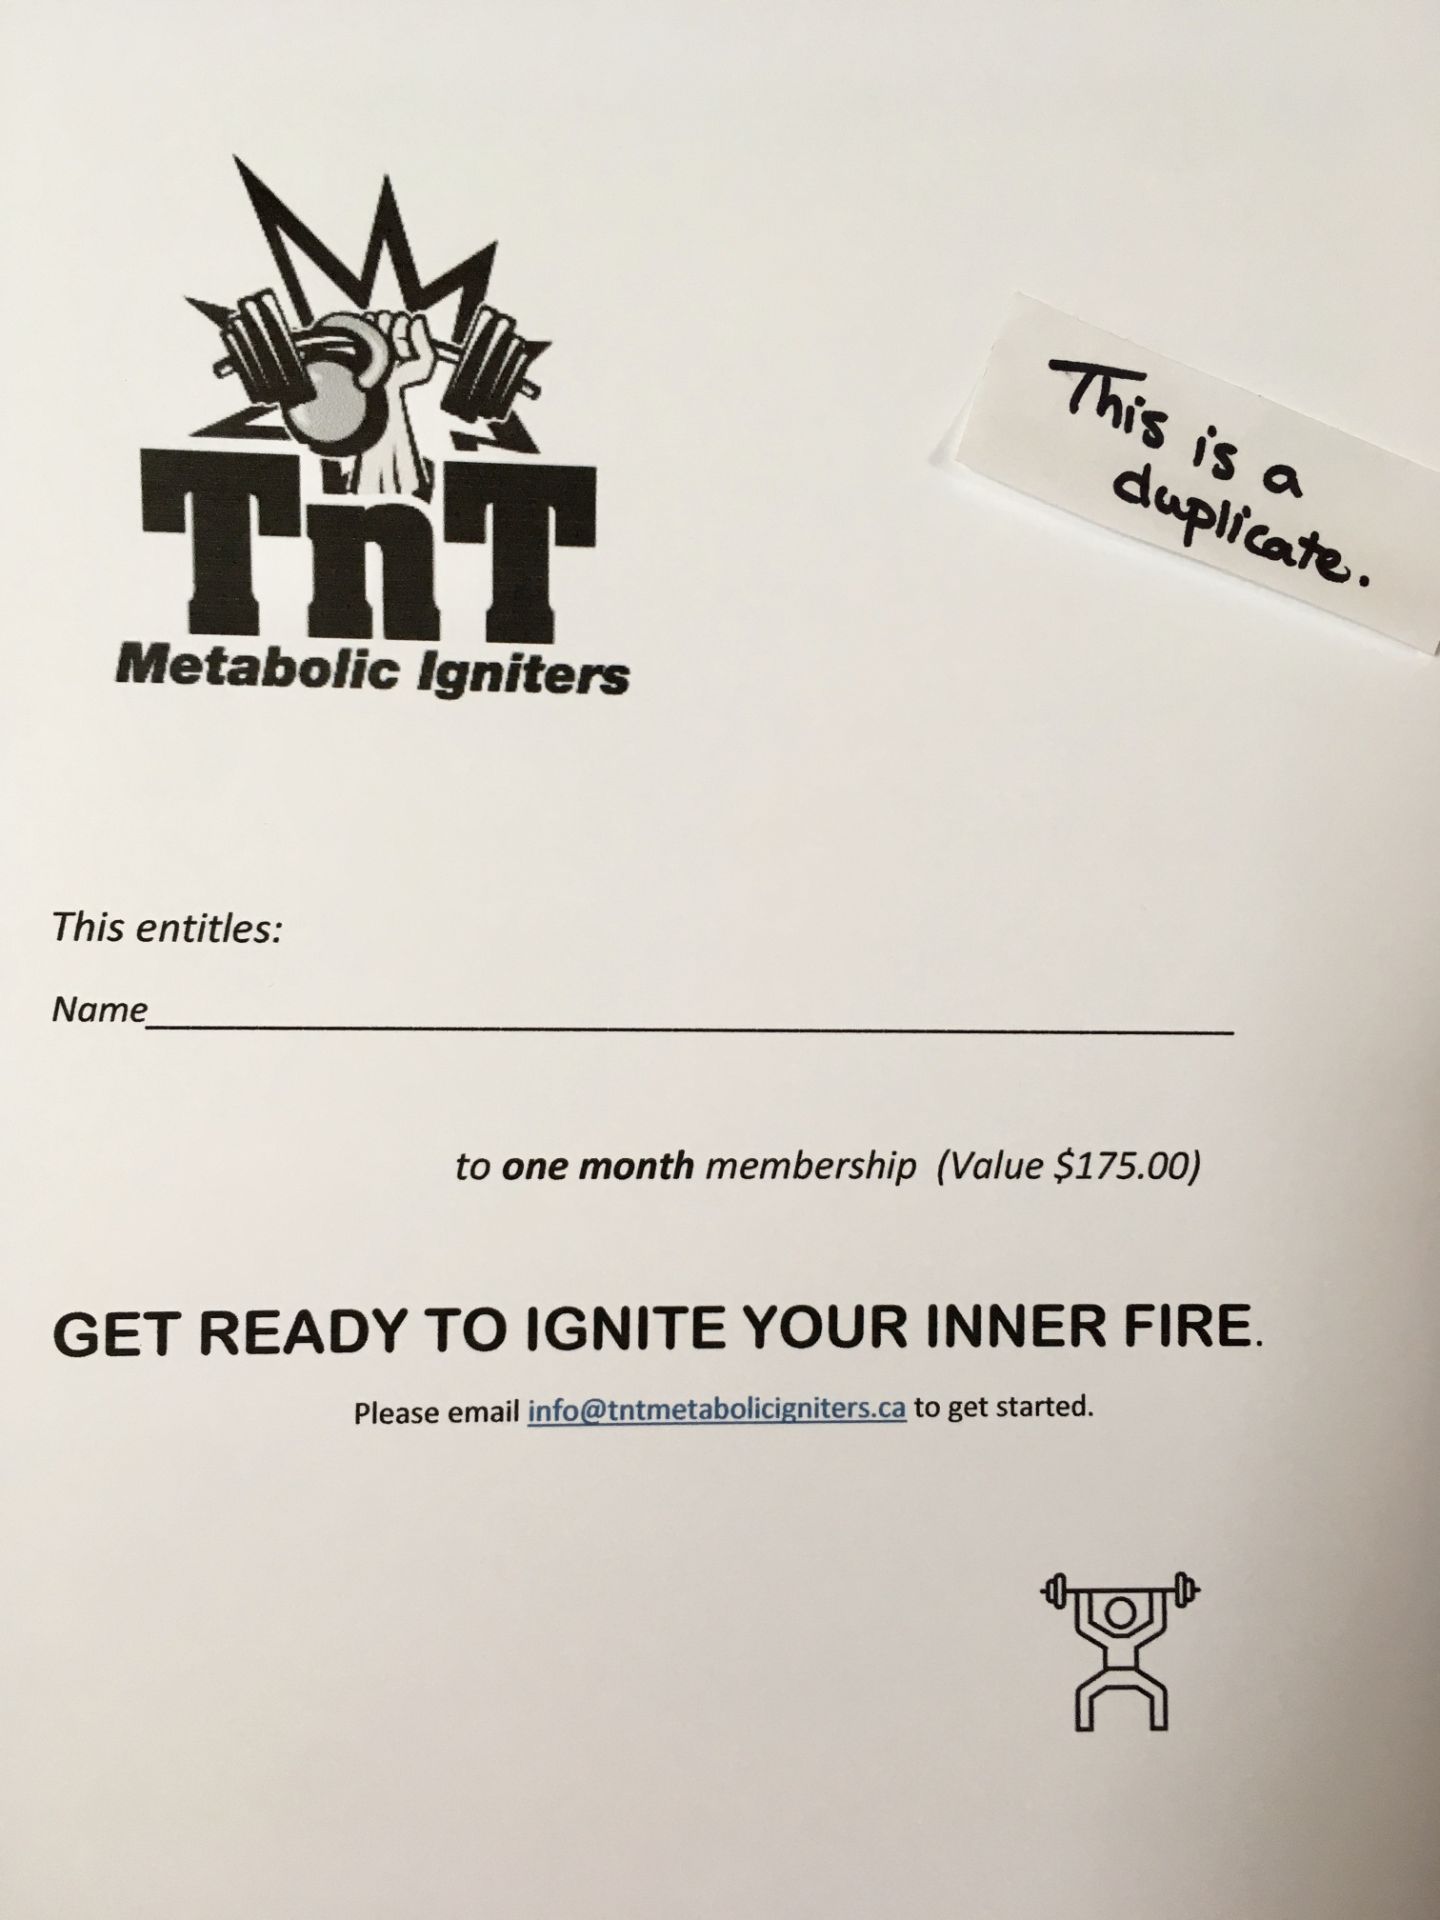 TNT METABOLIC IGNITERS ONE MONTH MEMBERSHIP GIFT CERTIFICATE TnT Metabolic Igniters is a fitness gym - Image 2 of 2